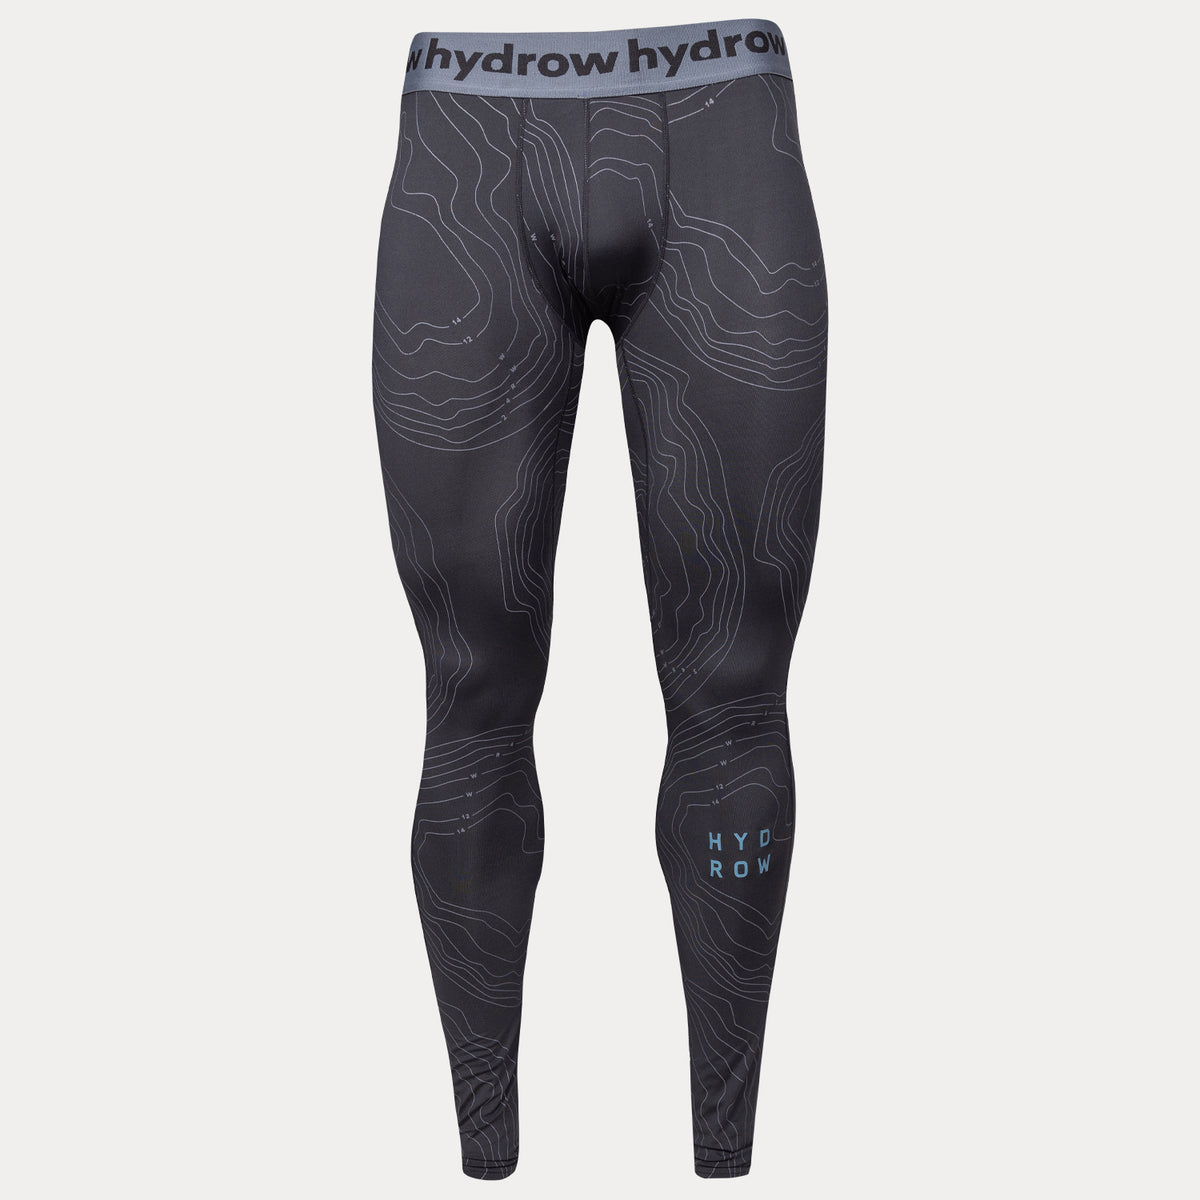 black active compression tights with hydrow logo on waistband and &quot;HYDROW&quot; test on left shin with bathymetric lines pattern